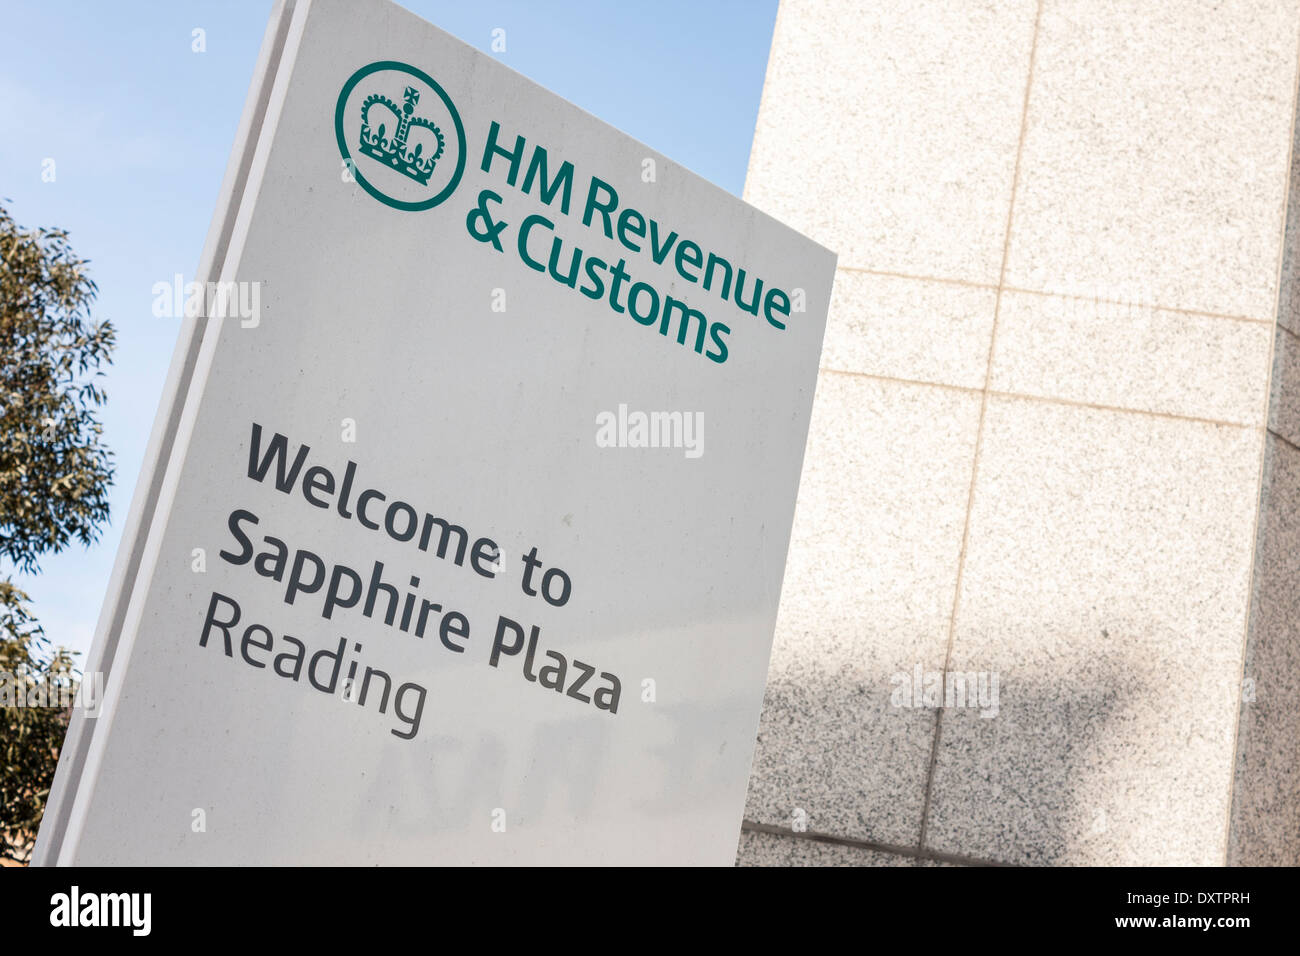 Sign outside former HMRC offices, Reading, Berkshire, England, GB, UK. Stock Photo